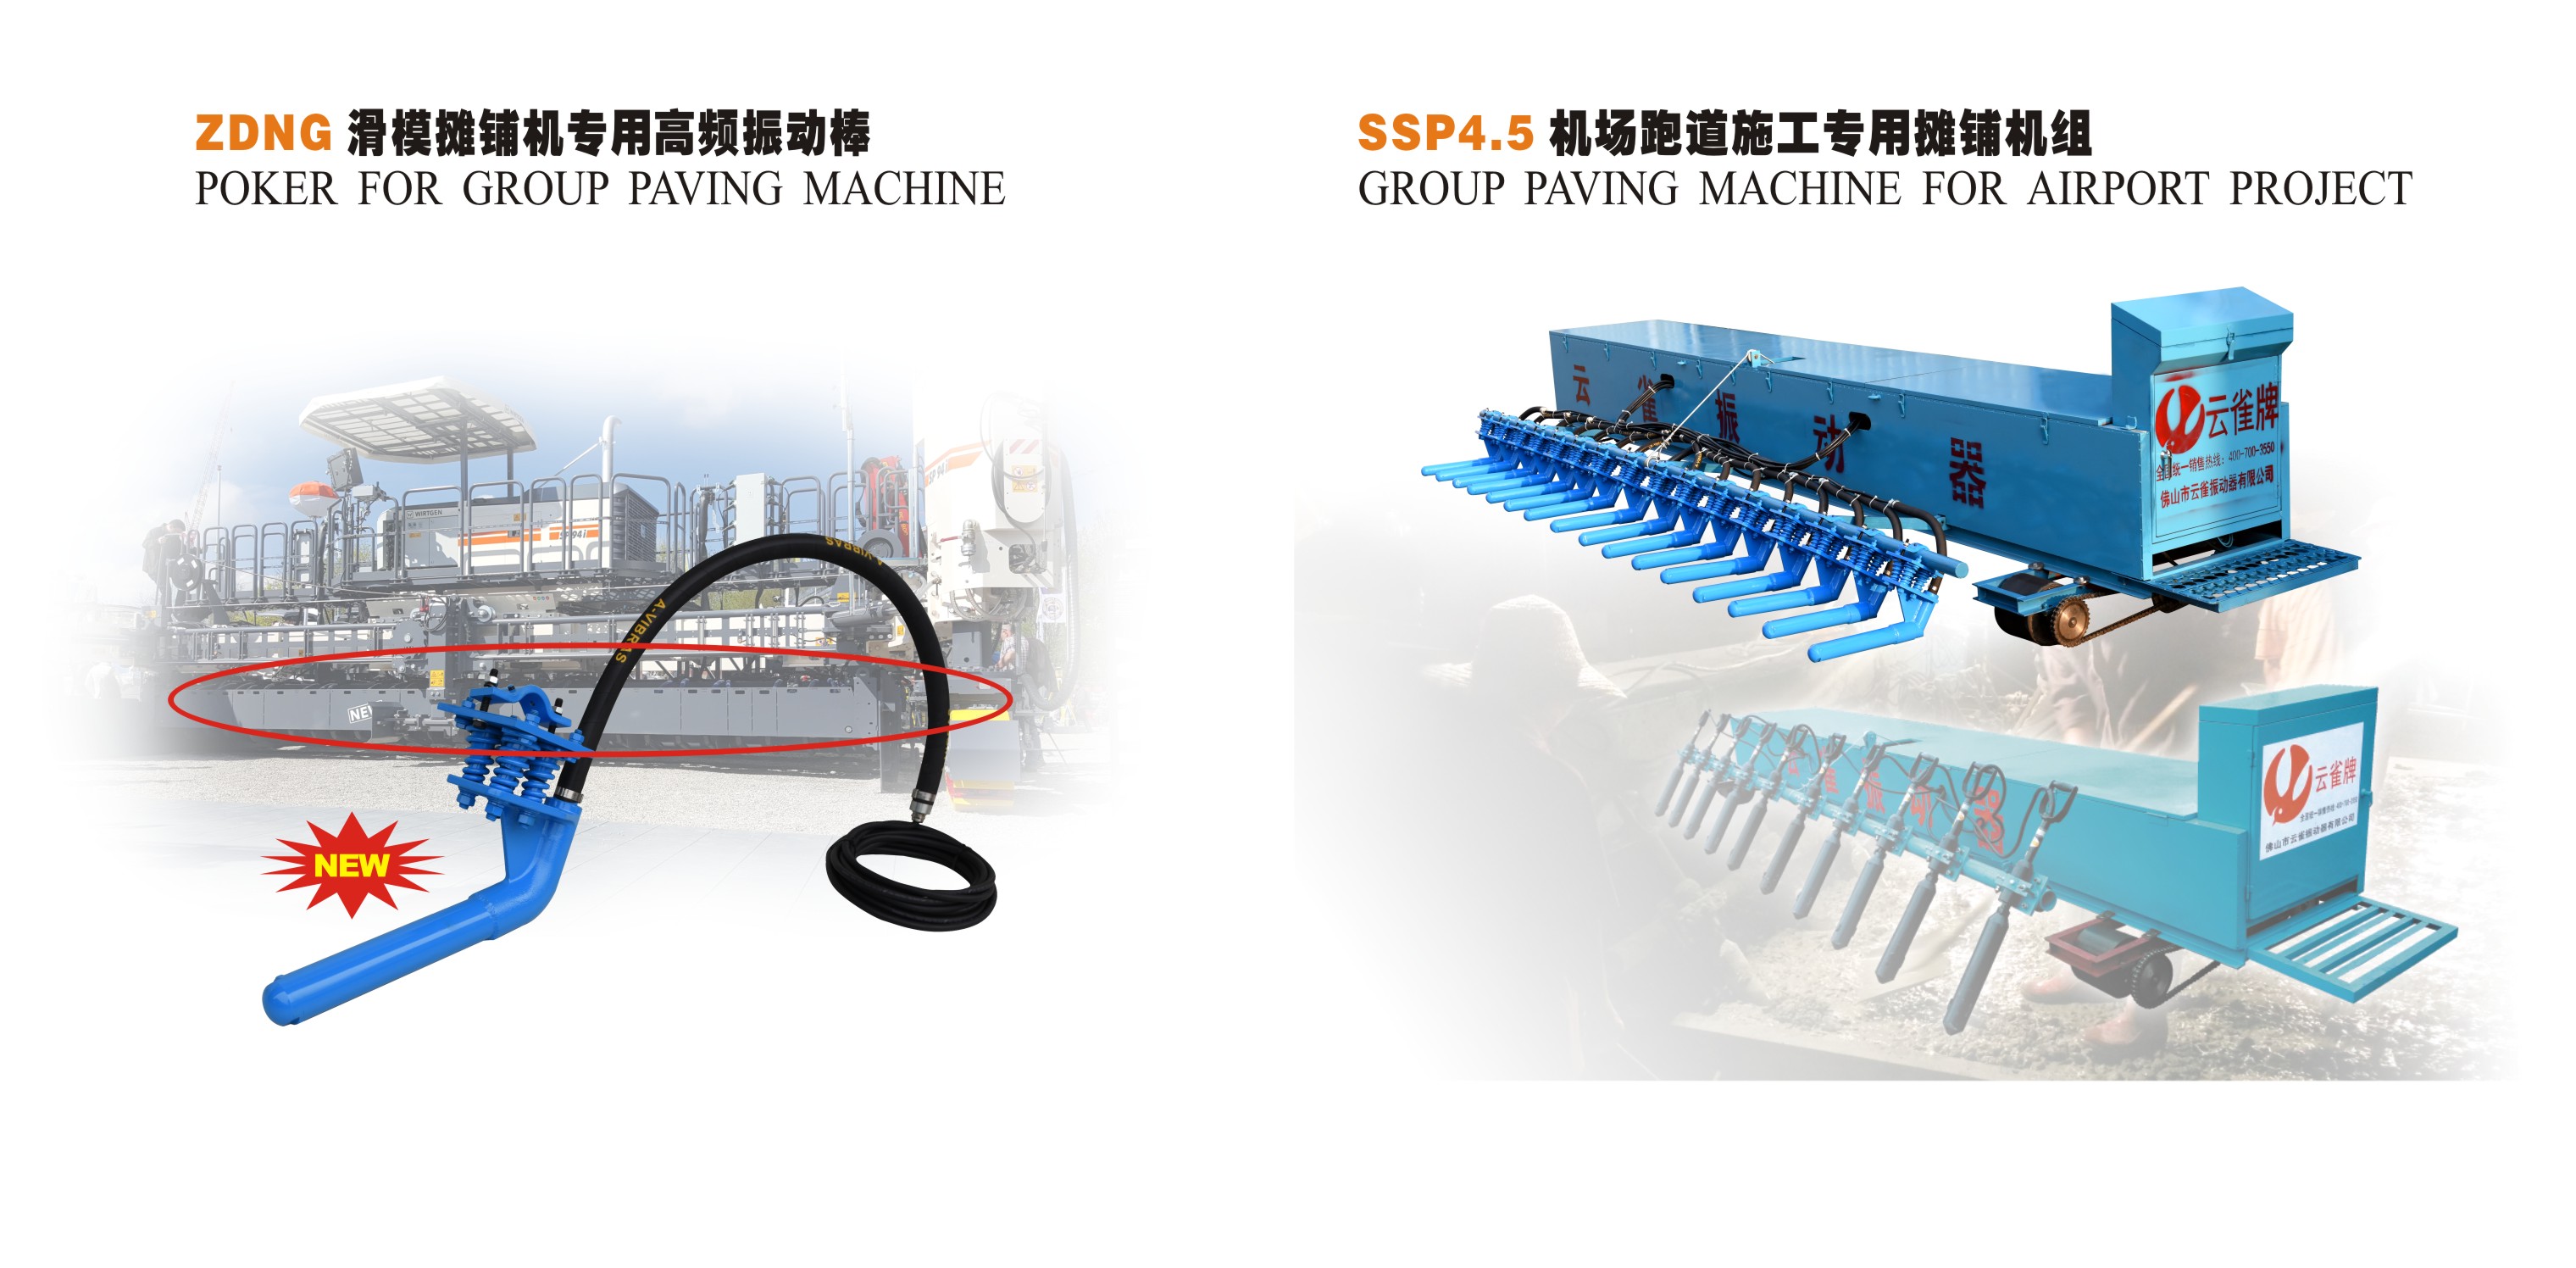 ZDNG SERIES HIGH REQUENCY POKER FOR GROUP PAVING MACHINE